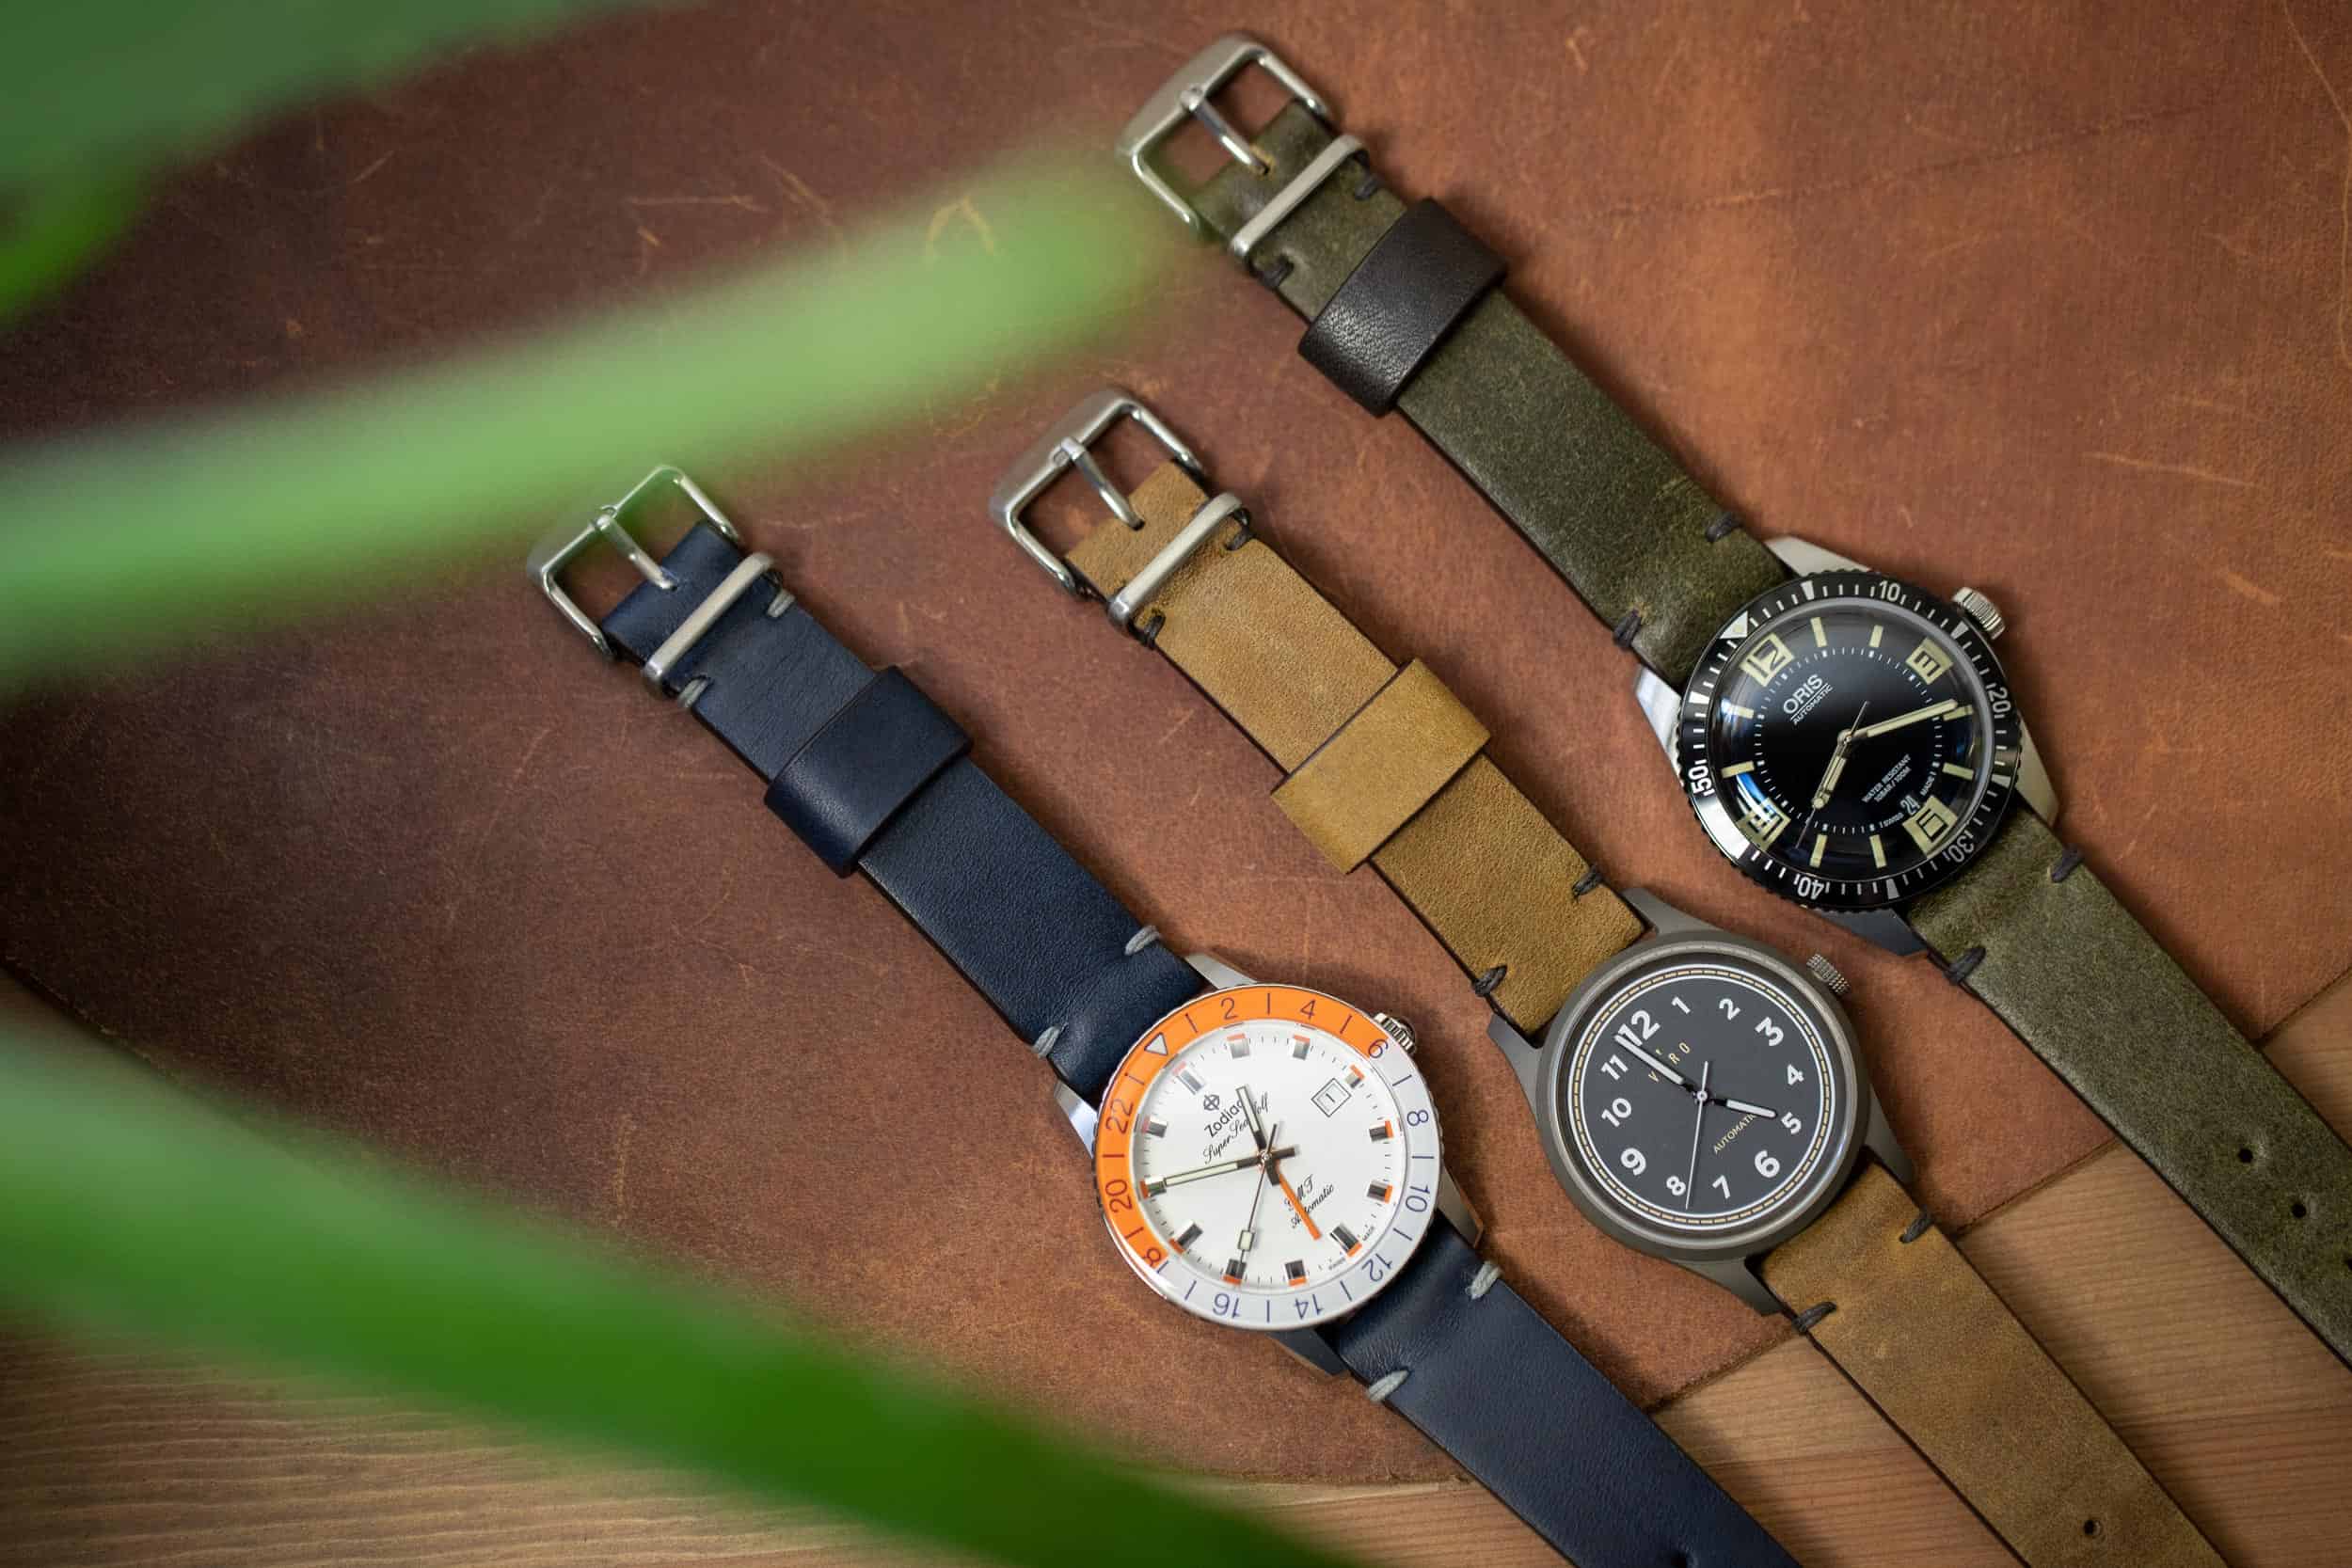 Announcing 3 New Colors of the American-made Model 2 Premium Strap – Now Available at the Windup Watch Shop